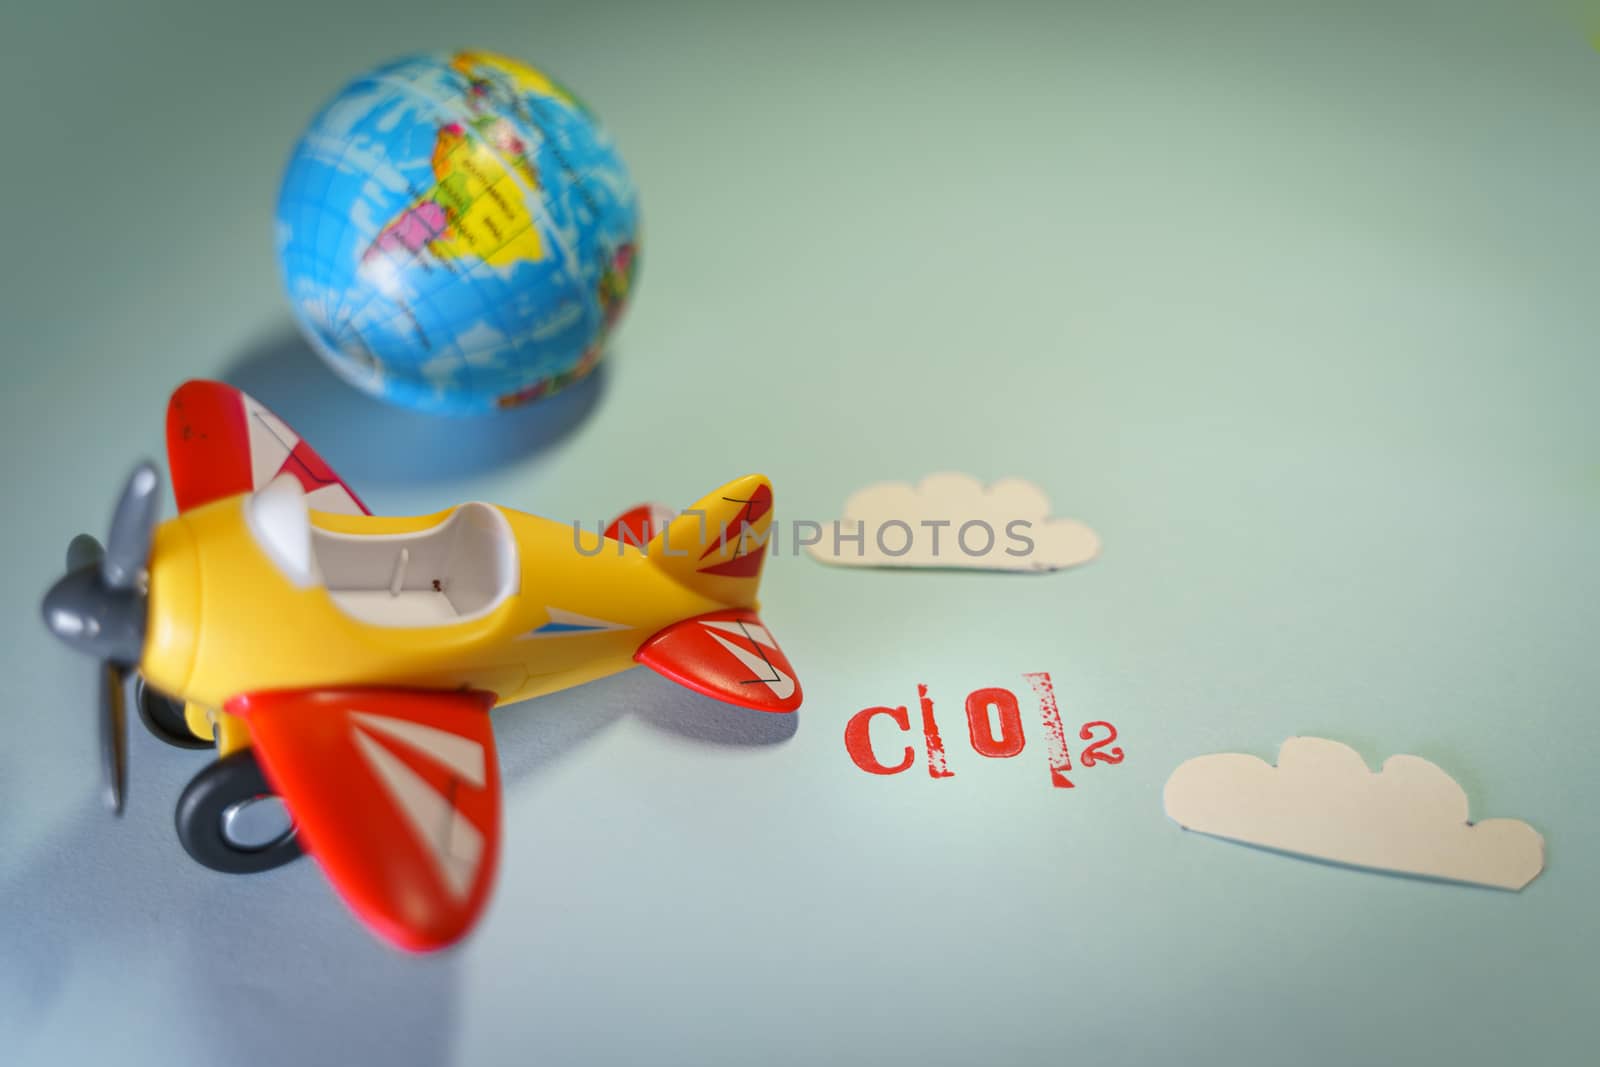 Airplane toy with CO2 word . Suitable for ecofriendly and sustainable journey concepts and the negative impact on the environment.